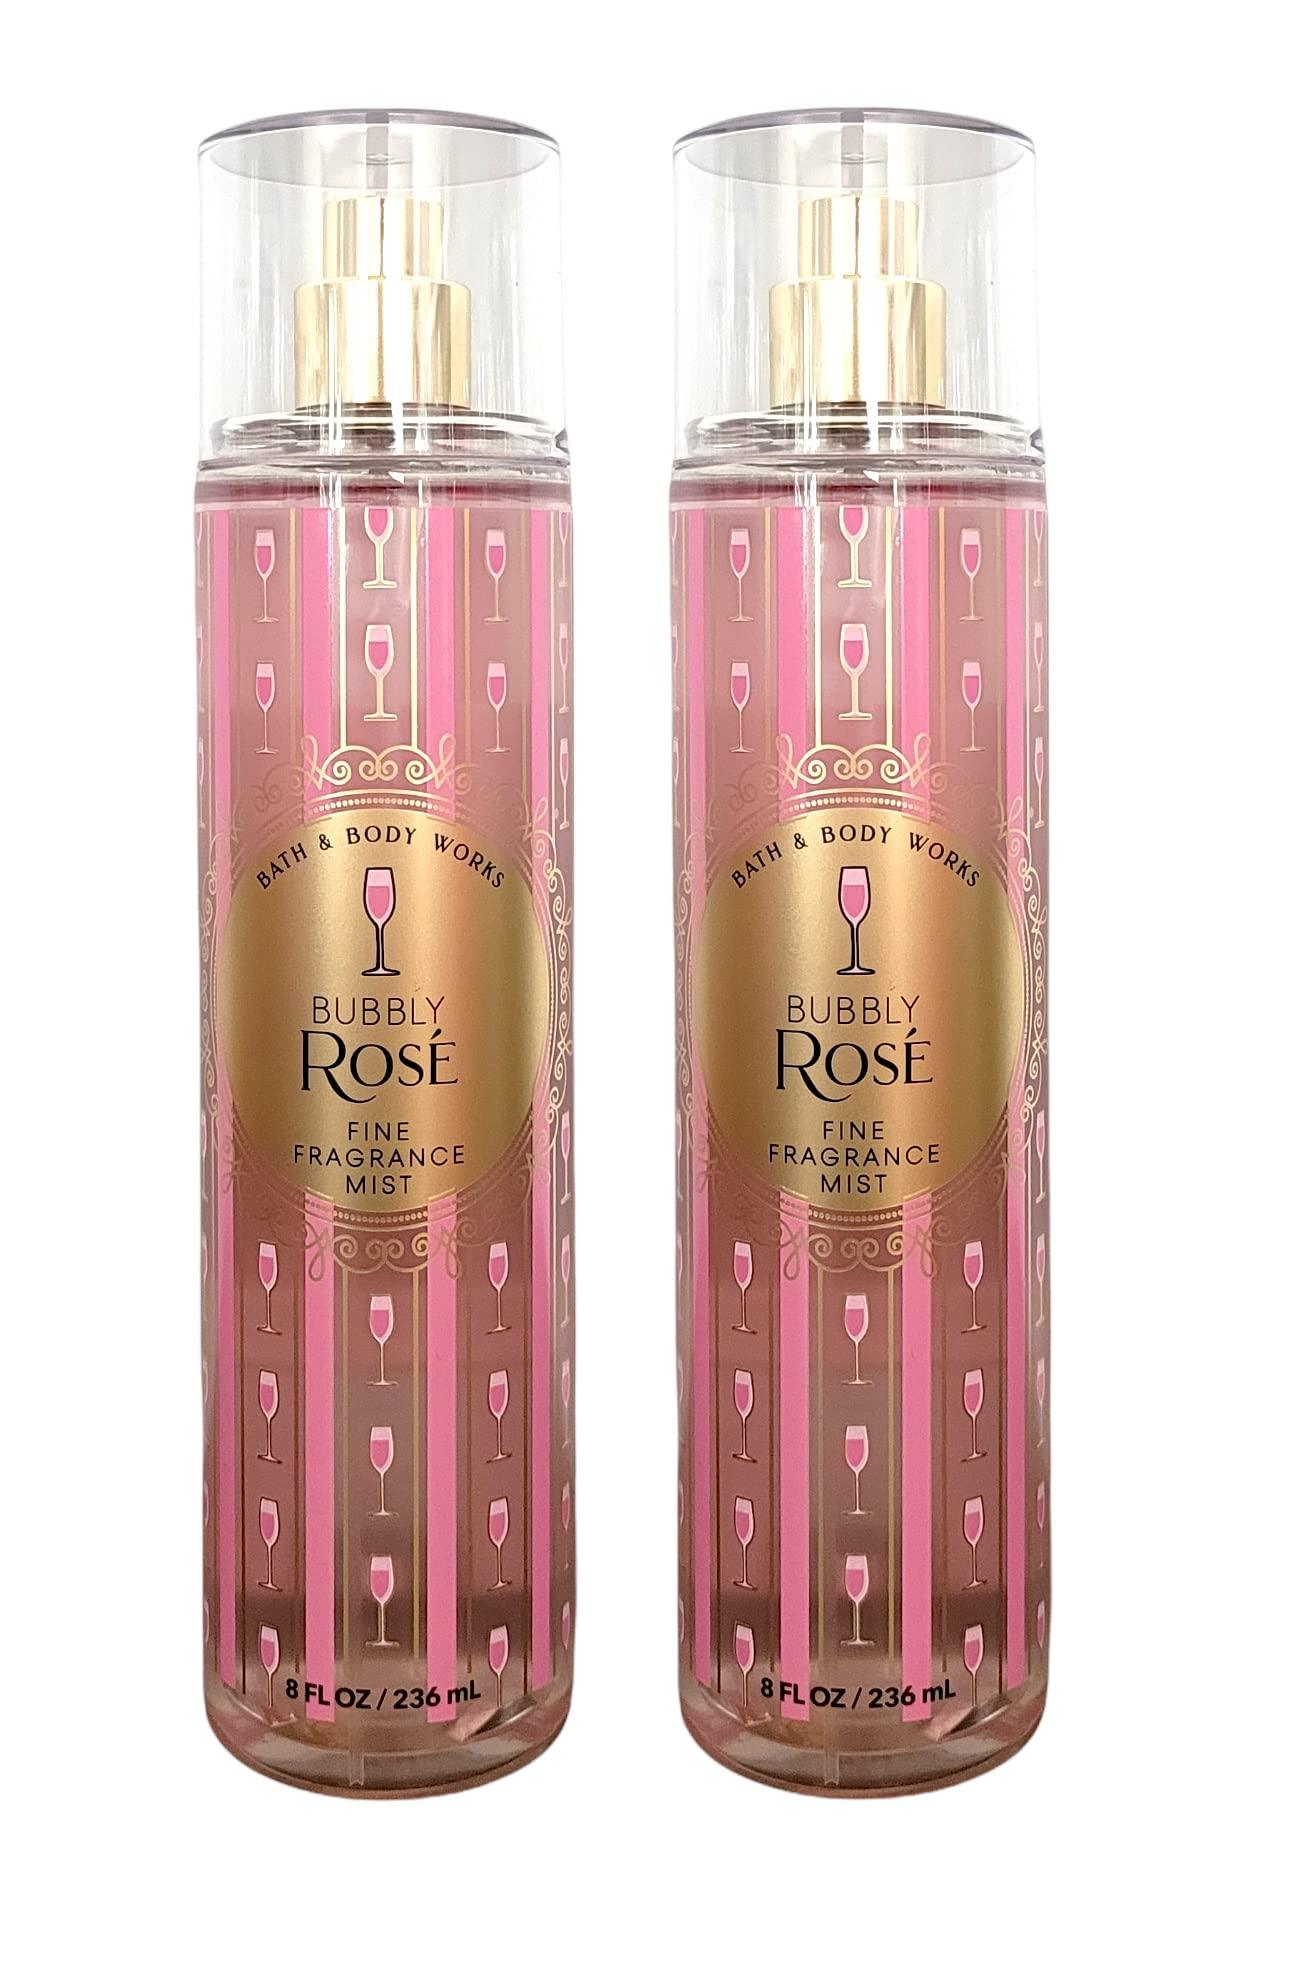 Bath And Body Works Bubbly Rose - Brivane